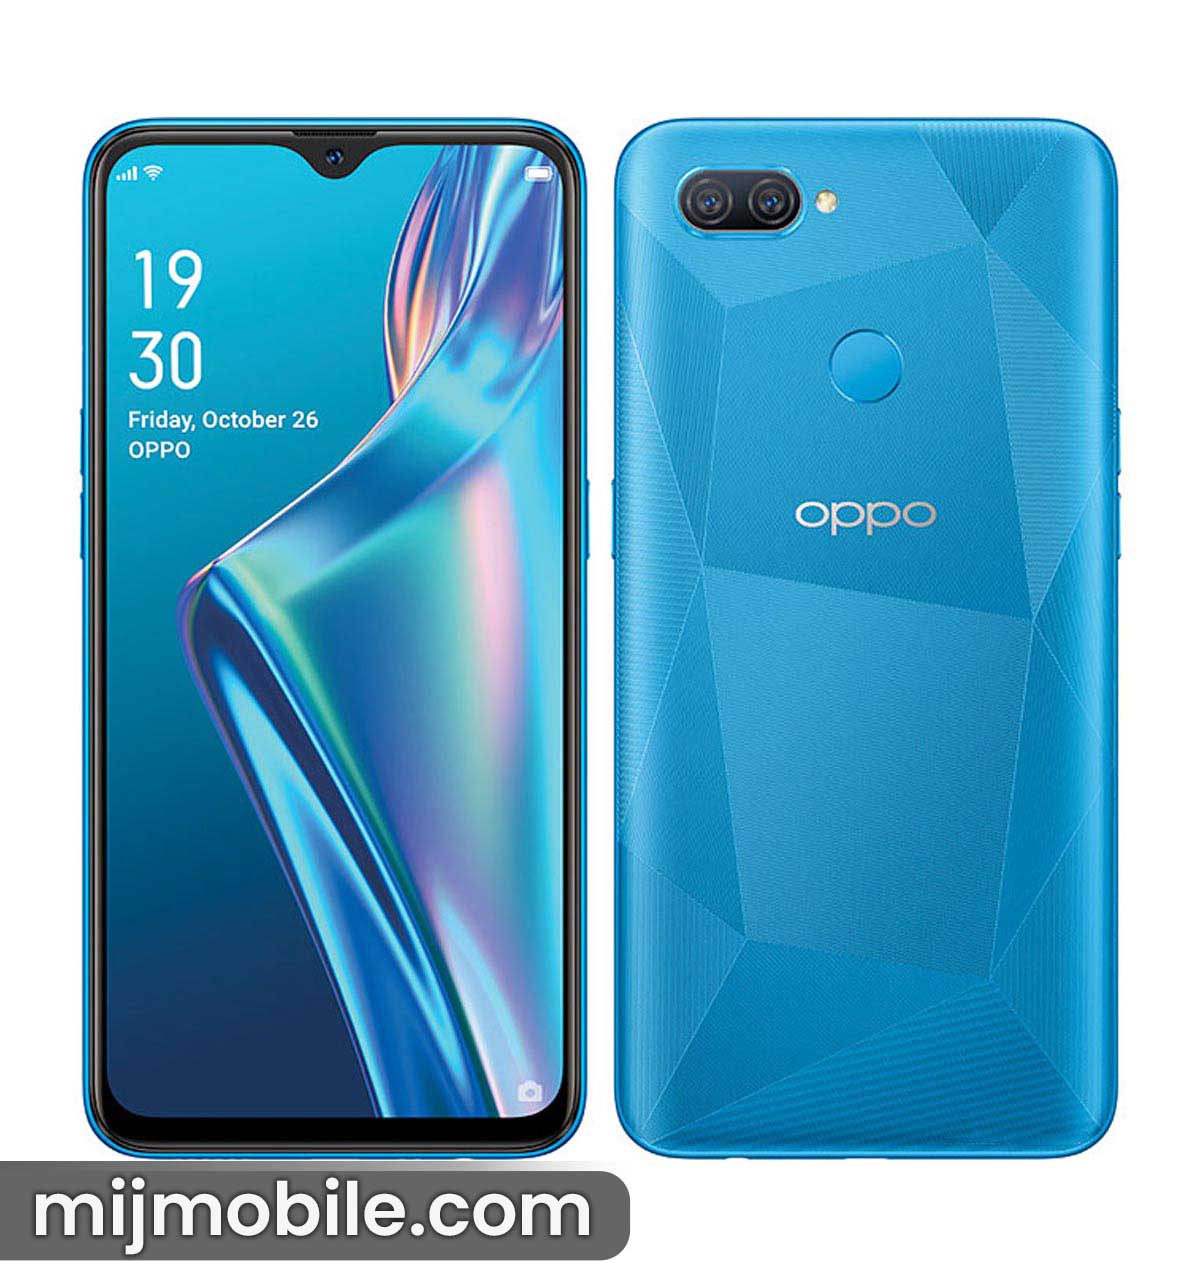 Oppo A12 Price in Pakistan & Specifications Oppo A12 Price in Pakistan is only 24,999.